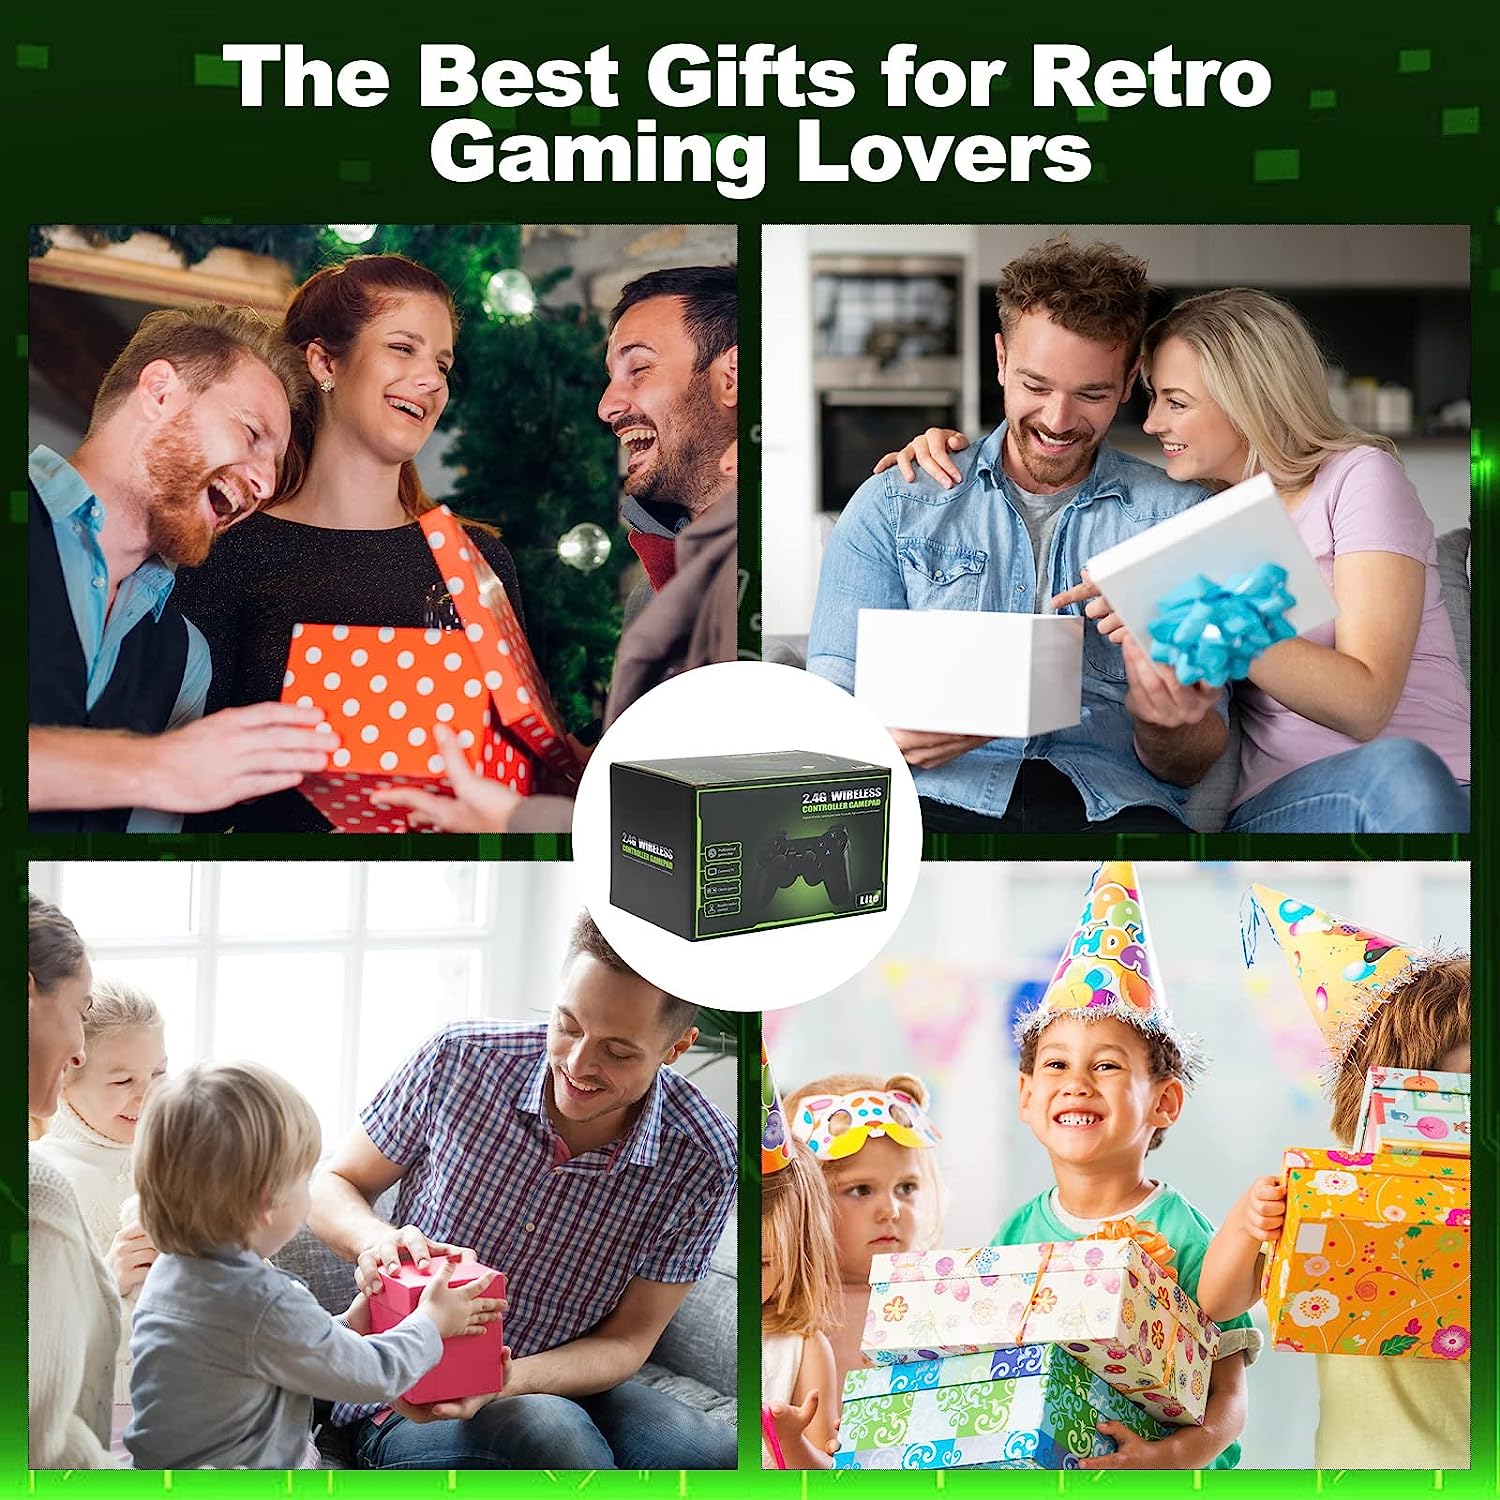 Retro Game Stick - Revisit Classic Games with Built-in 9 Emulators, 20,000+ Games, 4K HDMI Output, and 2.4GHz Wireless Controller for TV Plug and Play